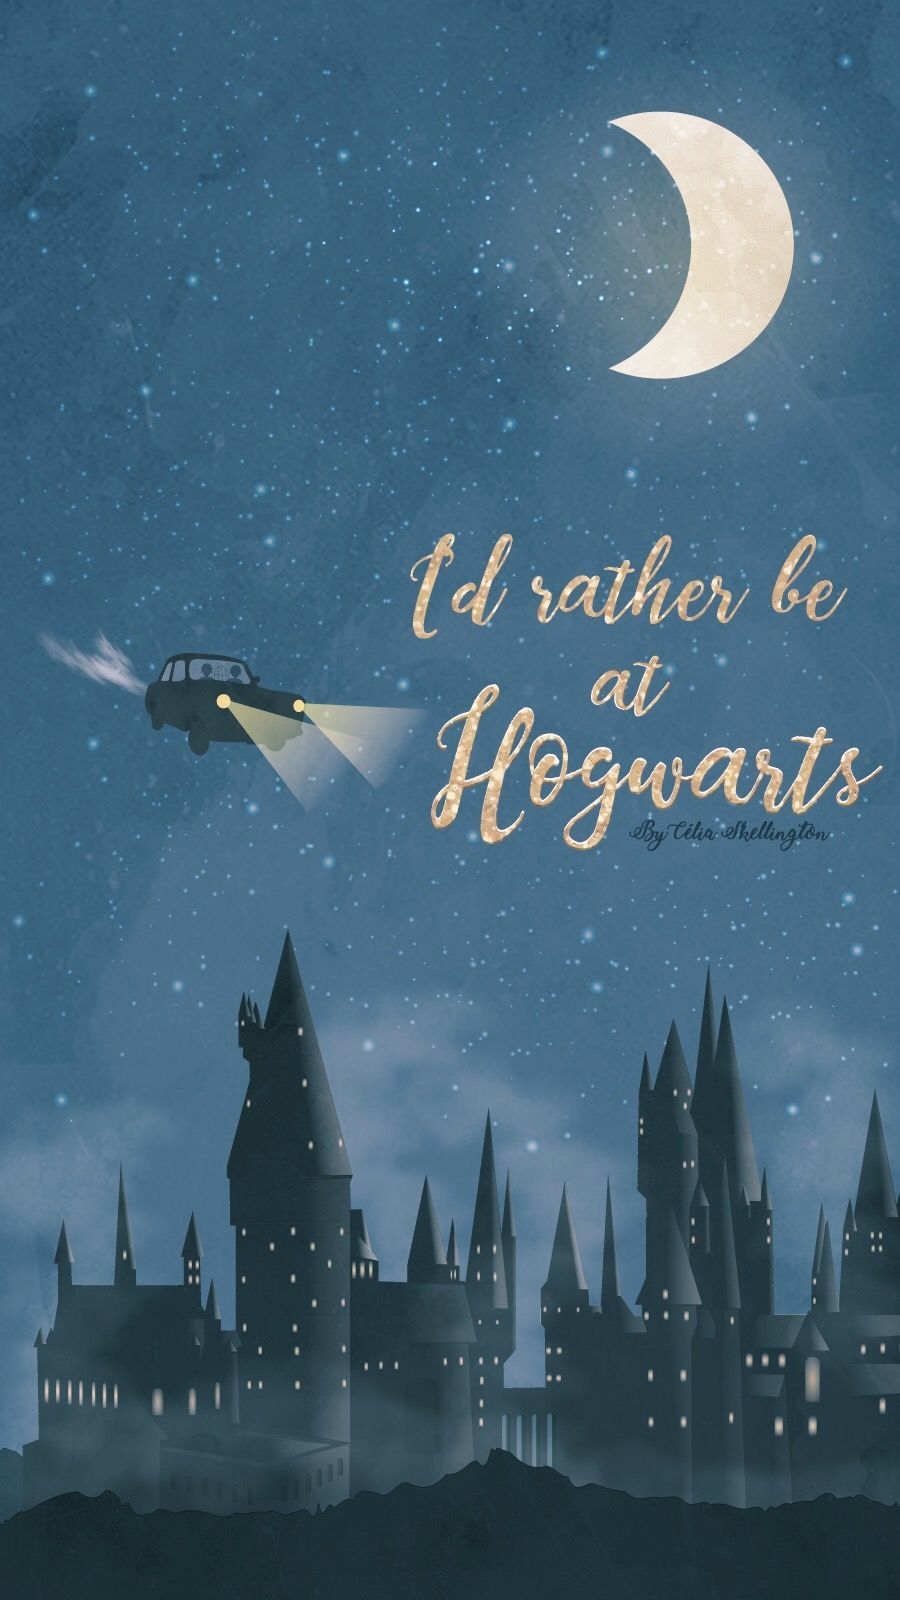 Free Download Harry Potter Wallpapers Harry Potter - Harry Potter Wallpaper Hogwarts - HD Wallpaper 